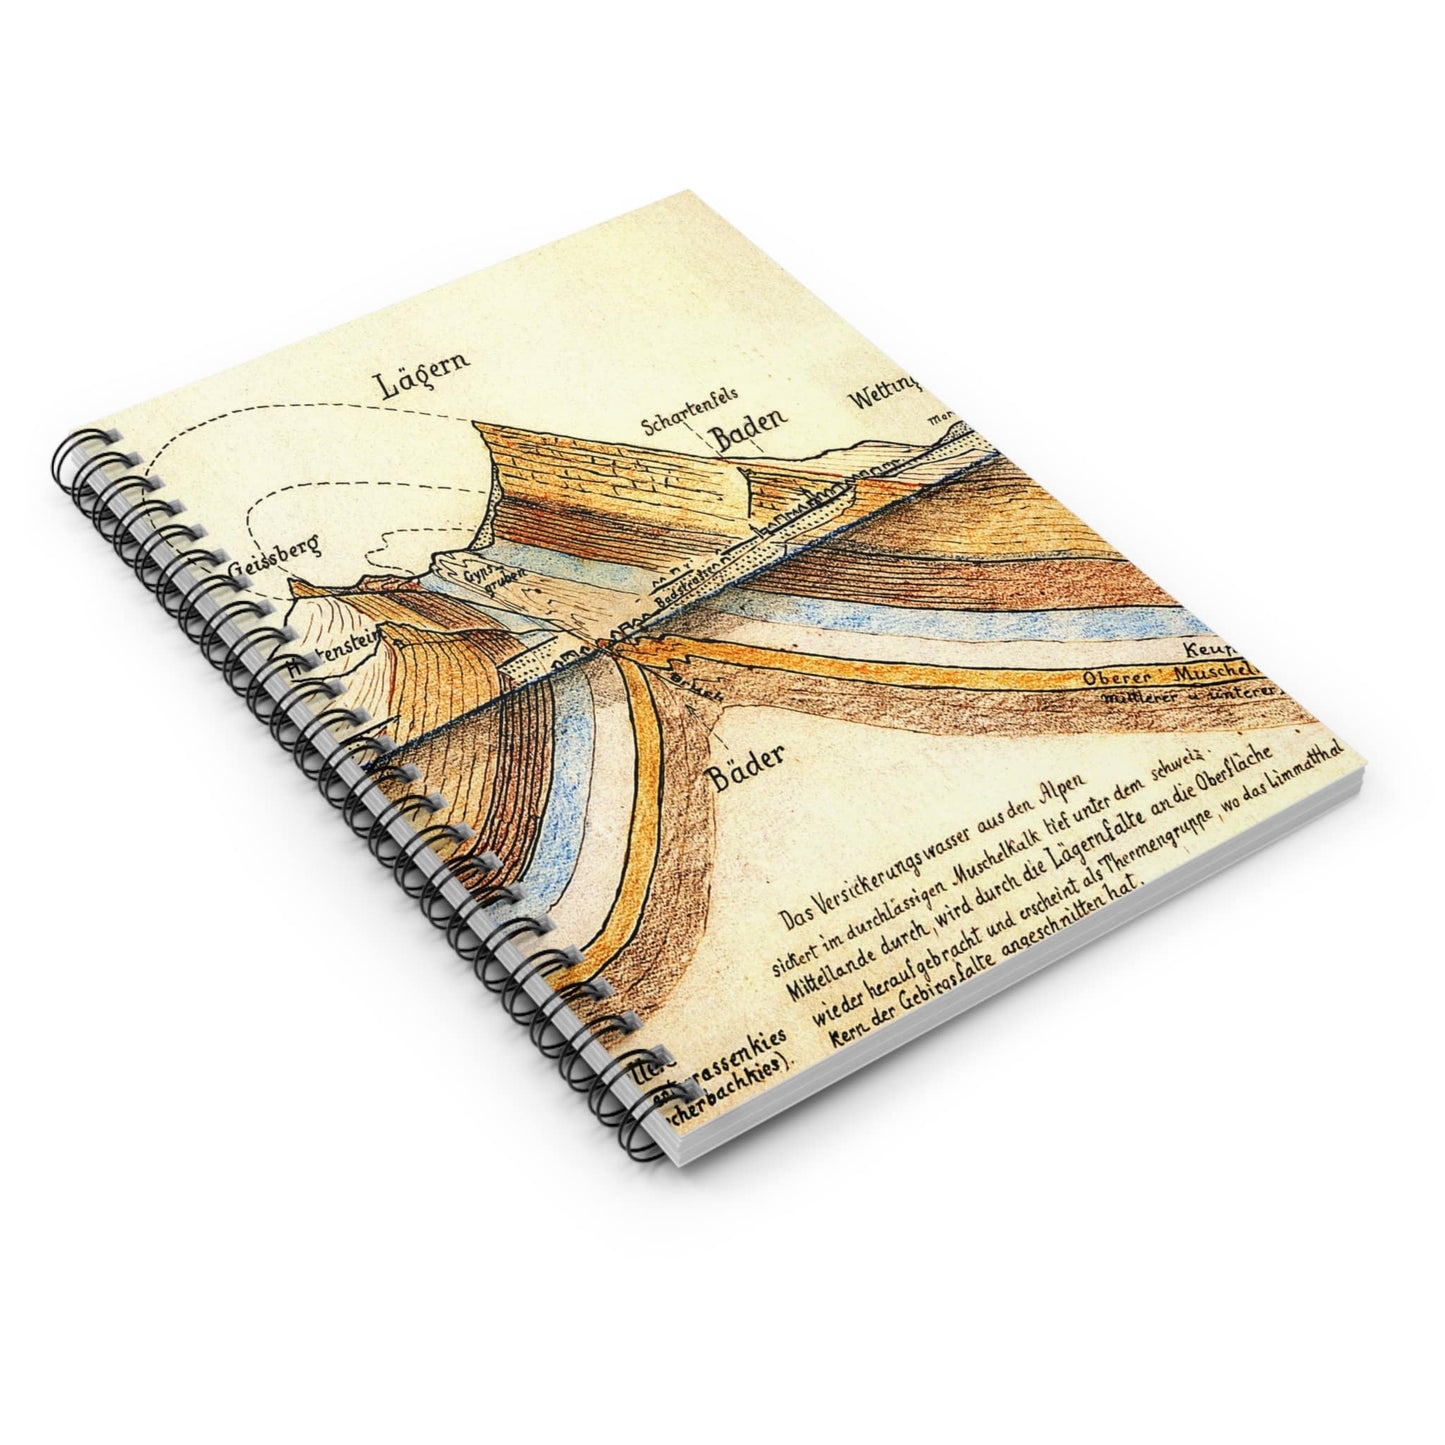 Vintage Scientific Spiral Notebook Laying Flat on White Surface